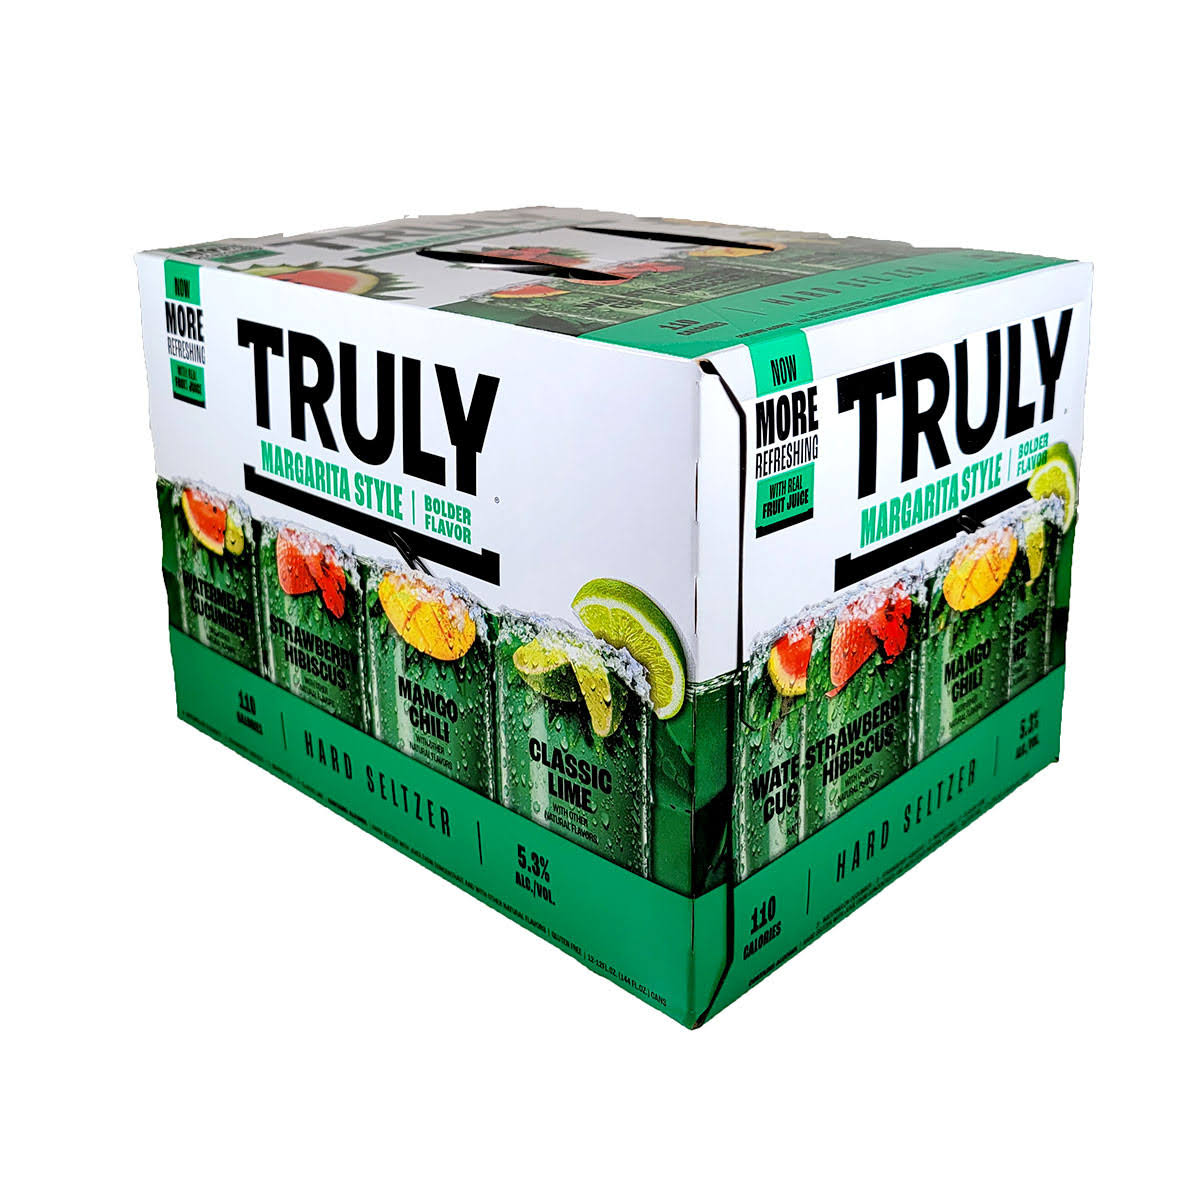 Truly Hard Seltzer, Margarita Style, Mix Pack - 12 pack, 12 fl oz cans